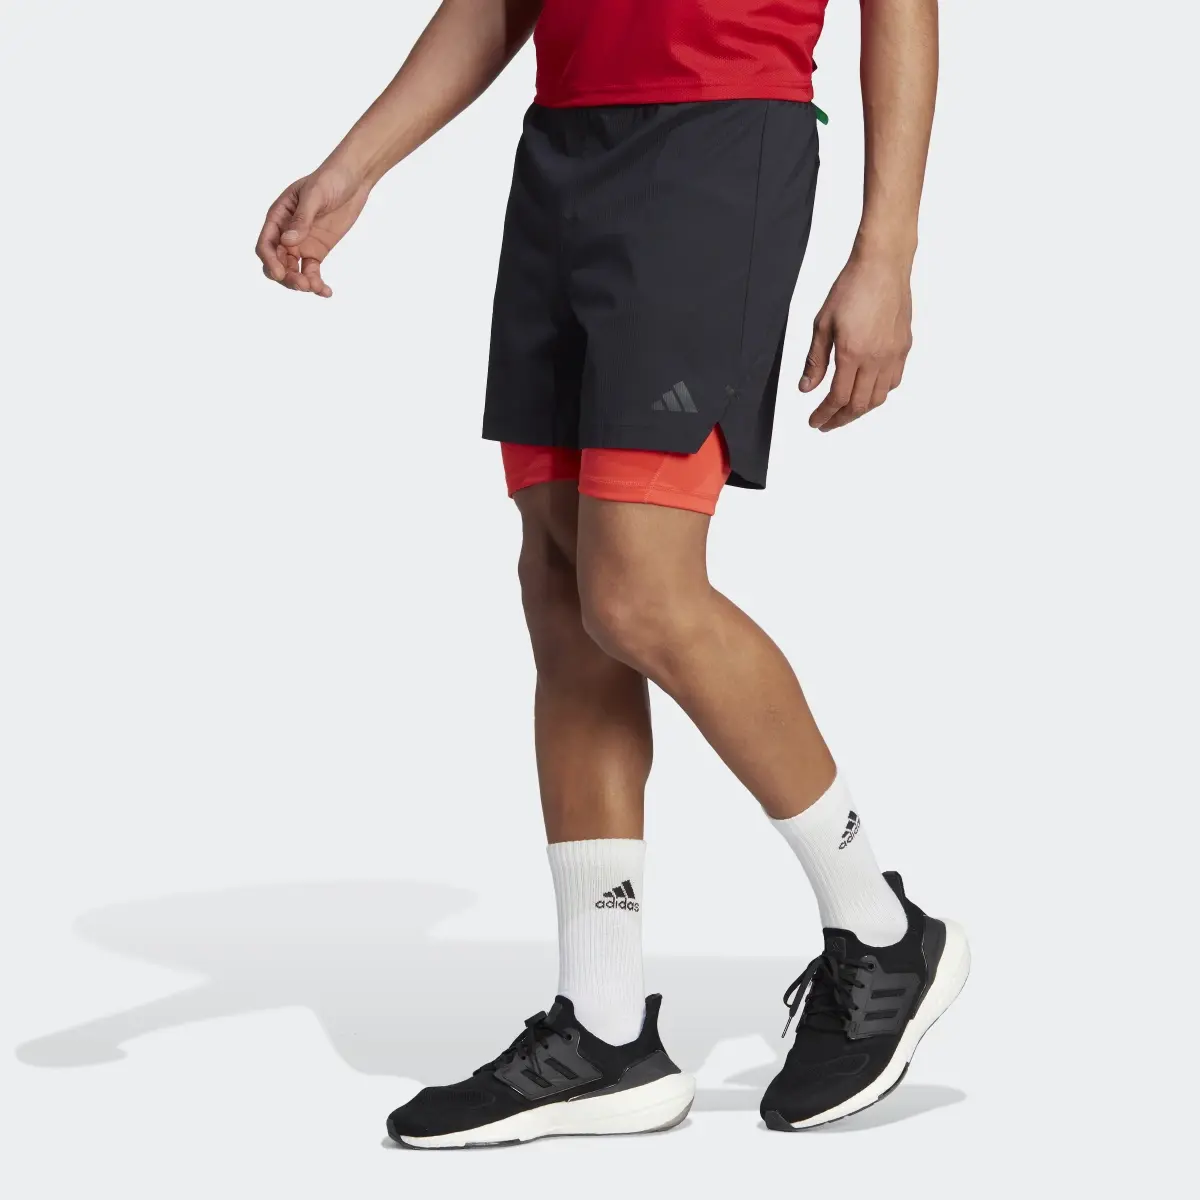 Adidas Short Power Workout Two-in-One. 1